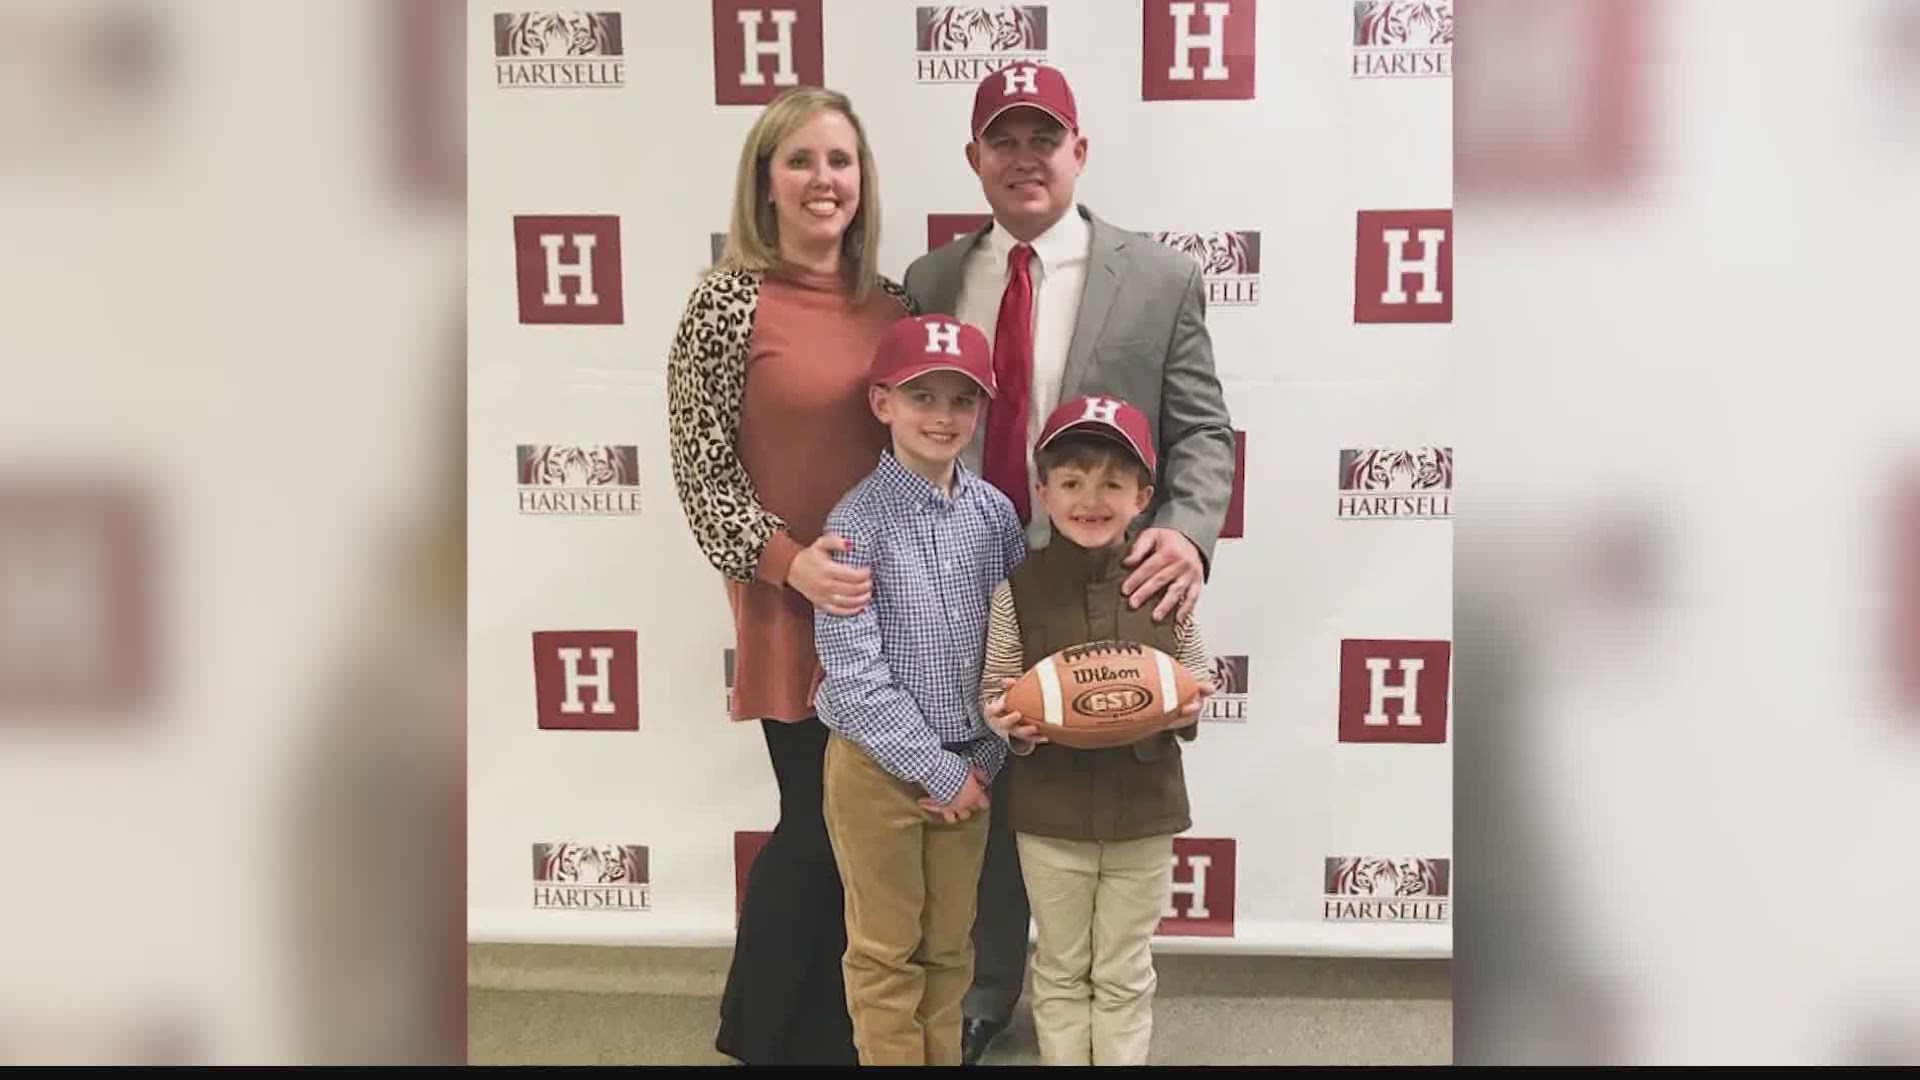 Bryan Moore is facing a few challenges as he heads into his first season as the head coach of the Hartselle Tigers.